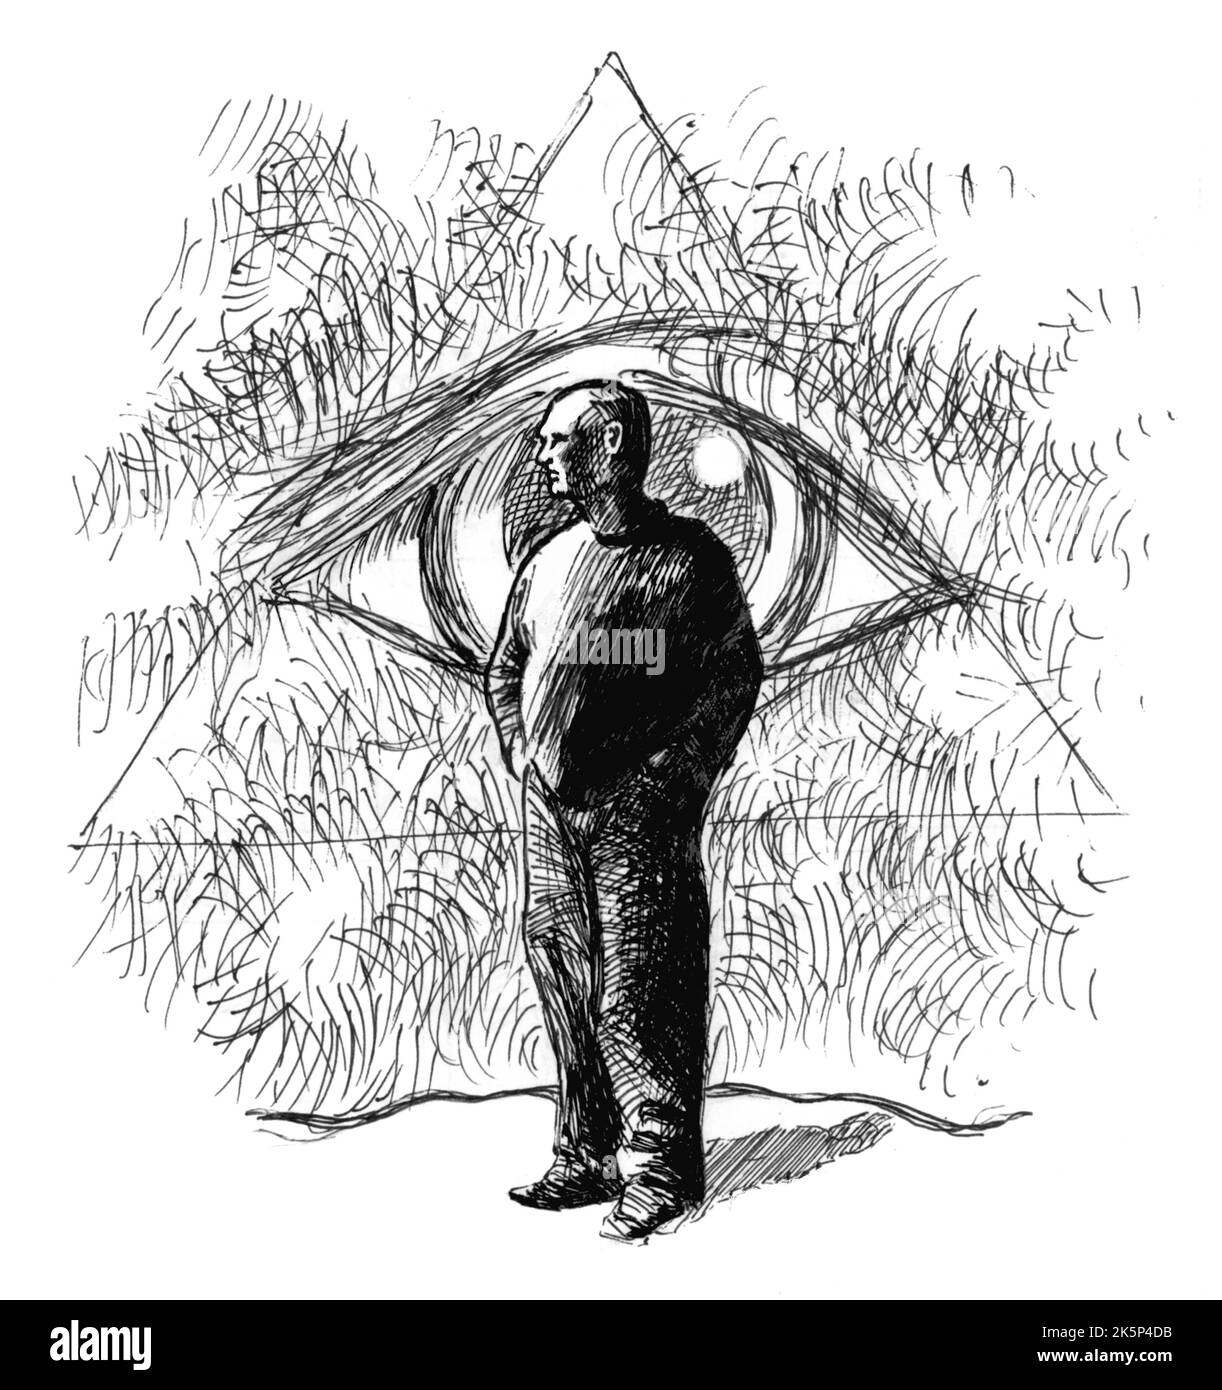 The figure of a man against the eye of providence - pen drawing, black and white illustration. Stock Photo